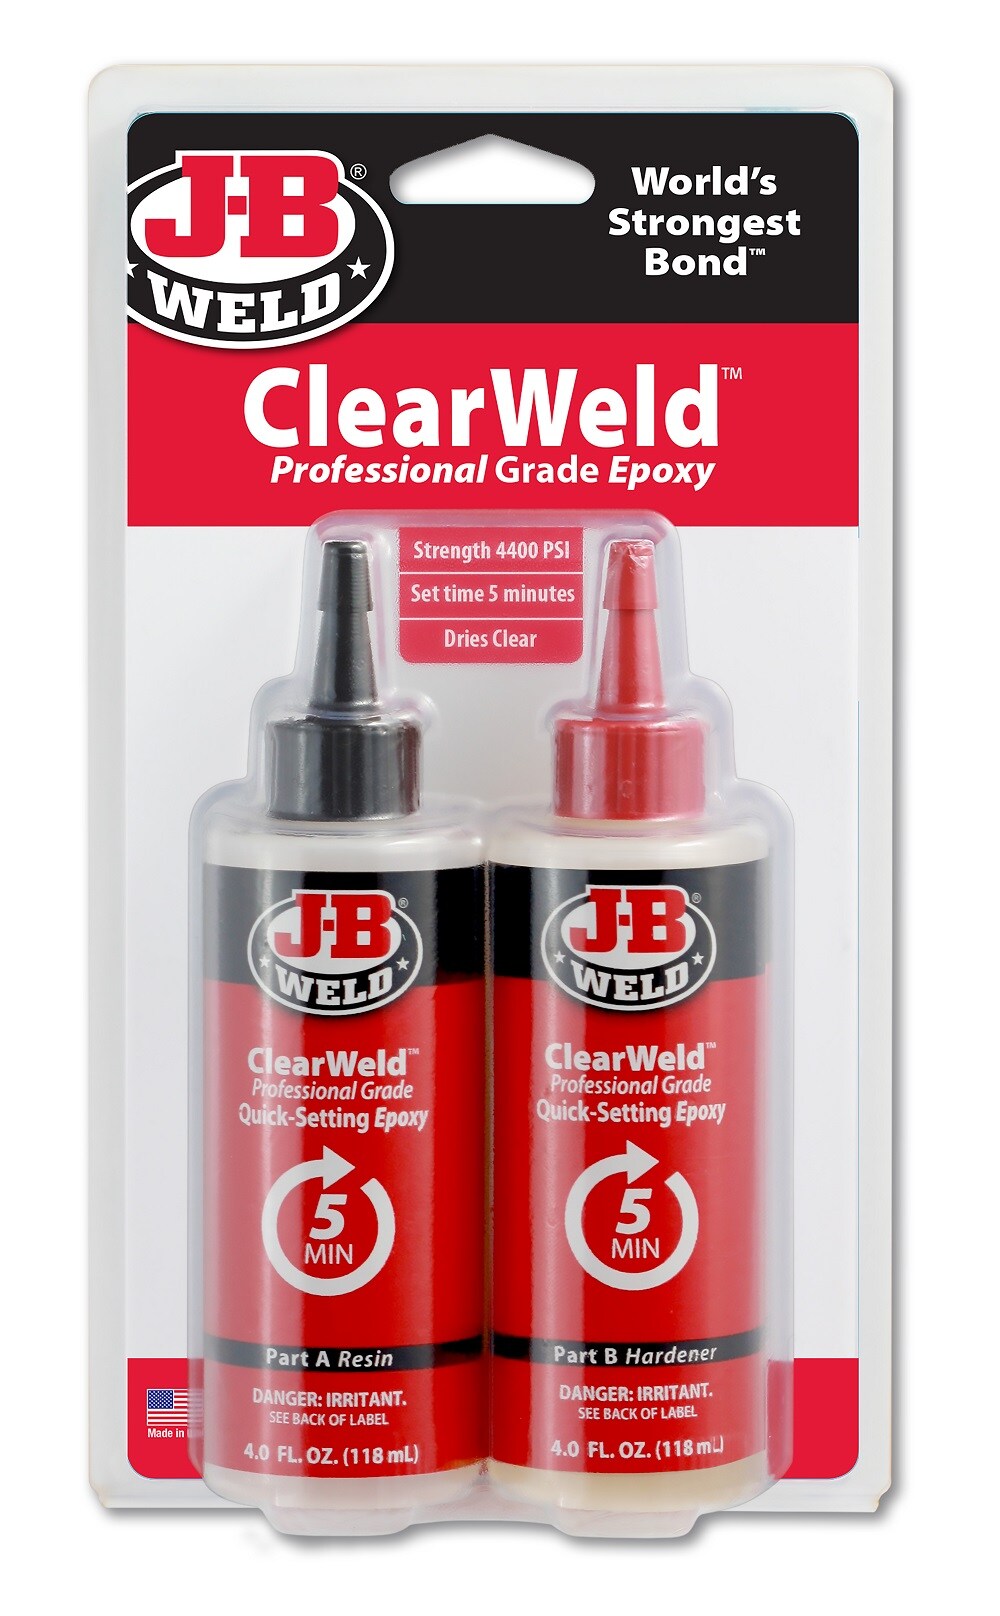 What is the strongest 2-part epoxy adhesive glue for plastic and metal?